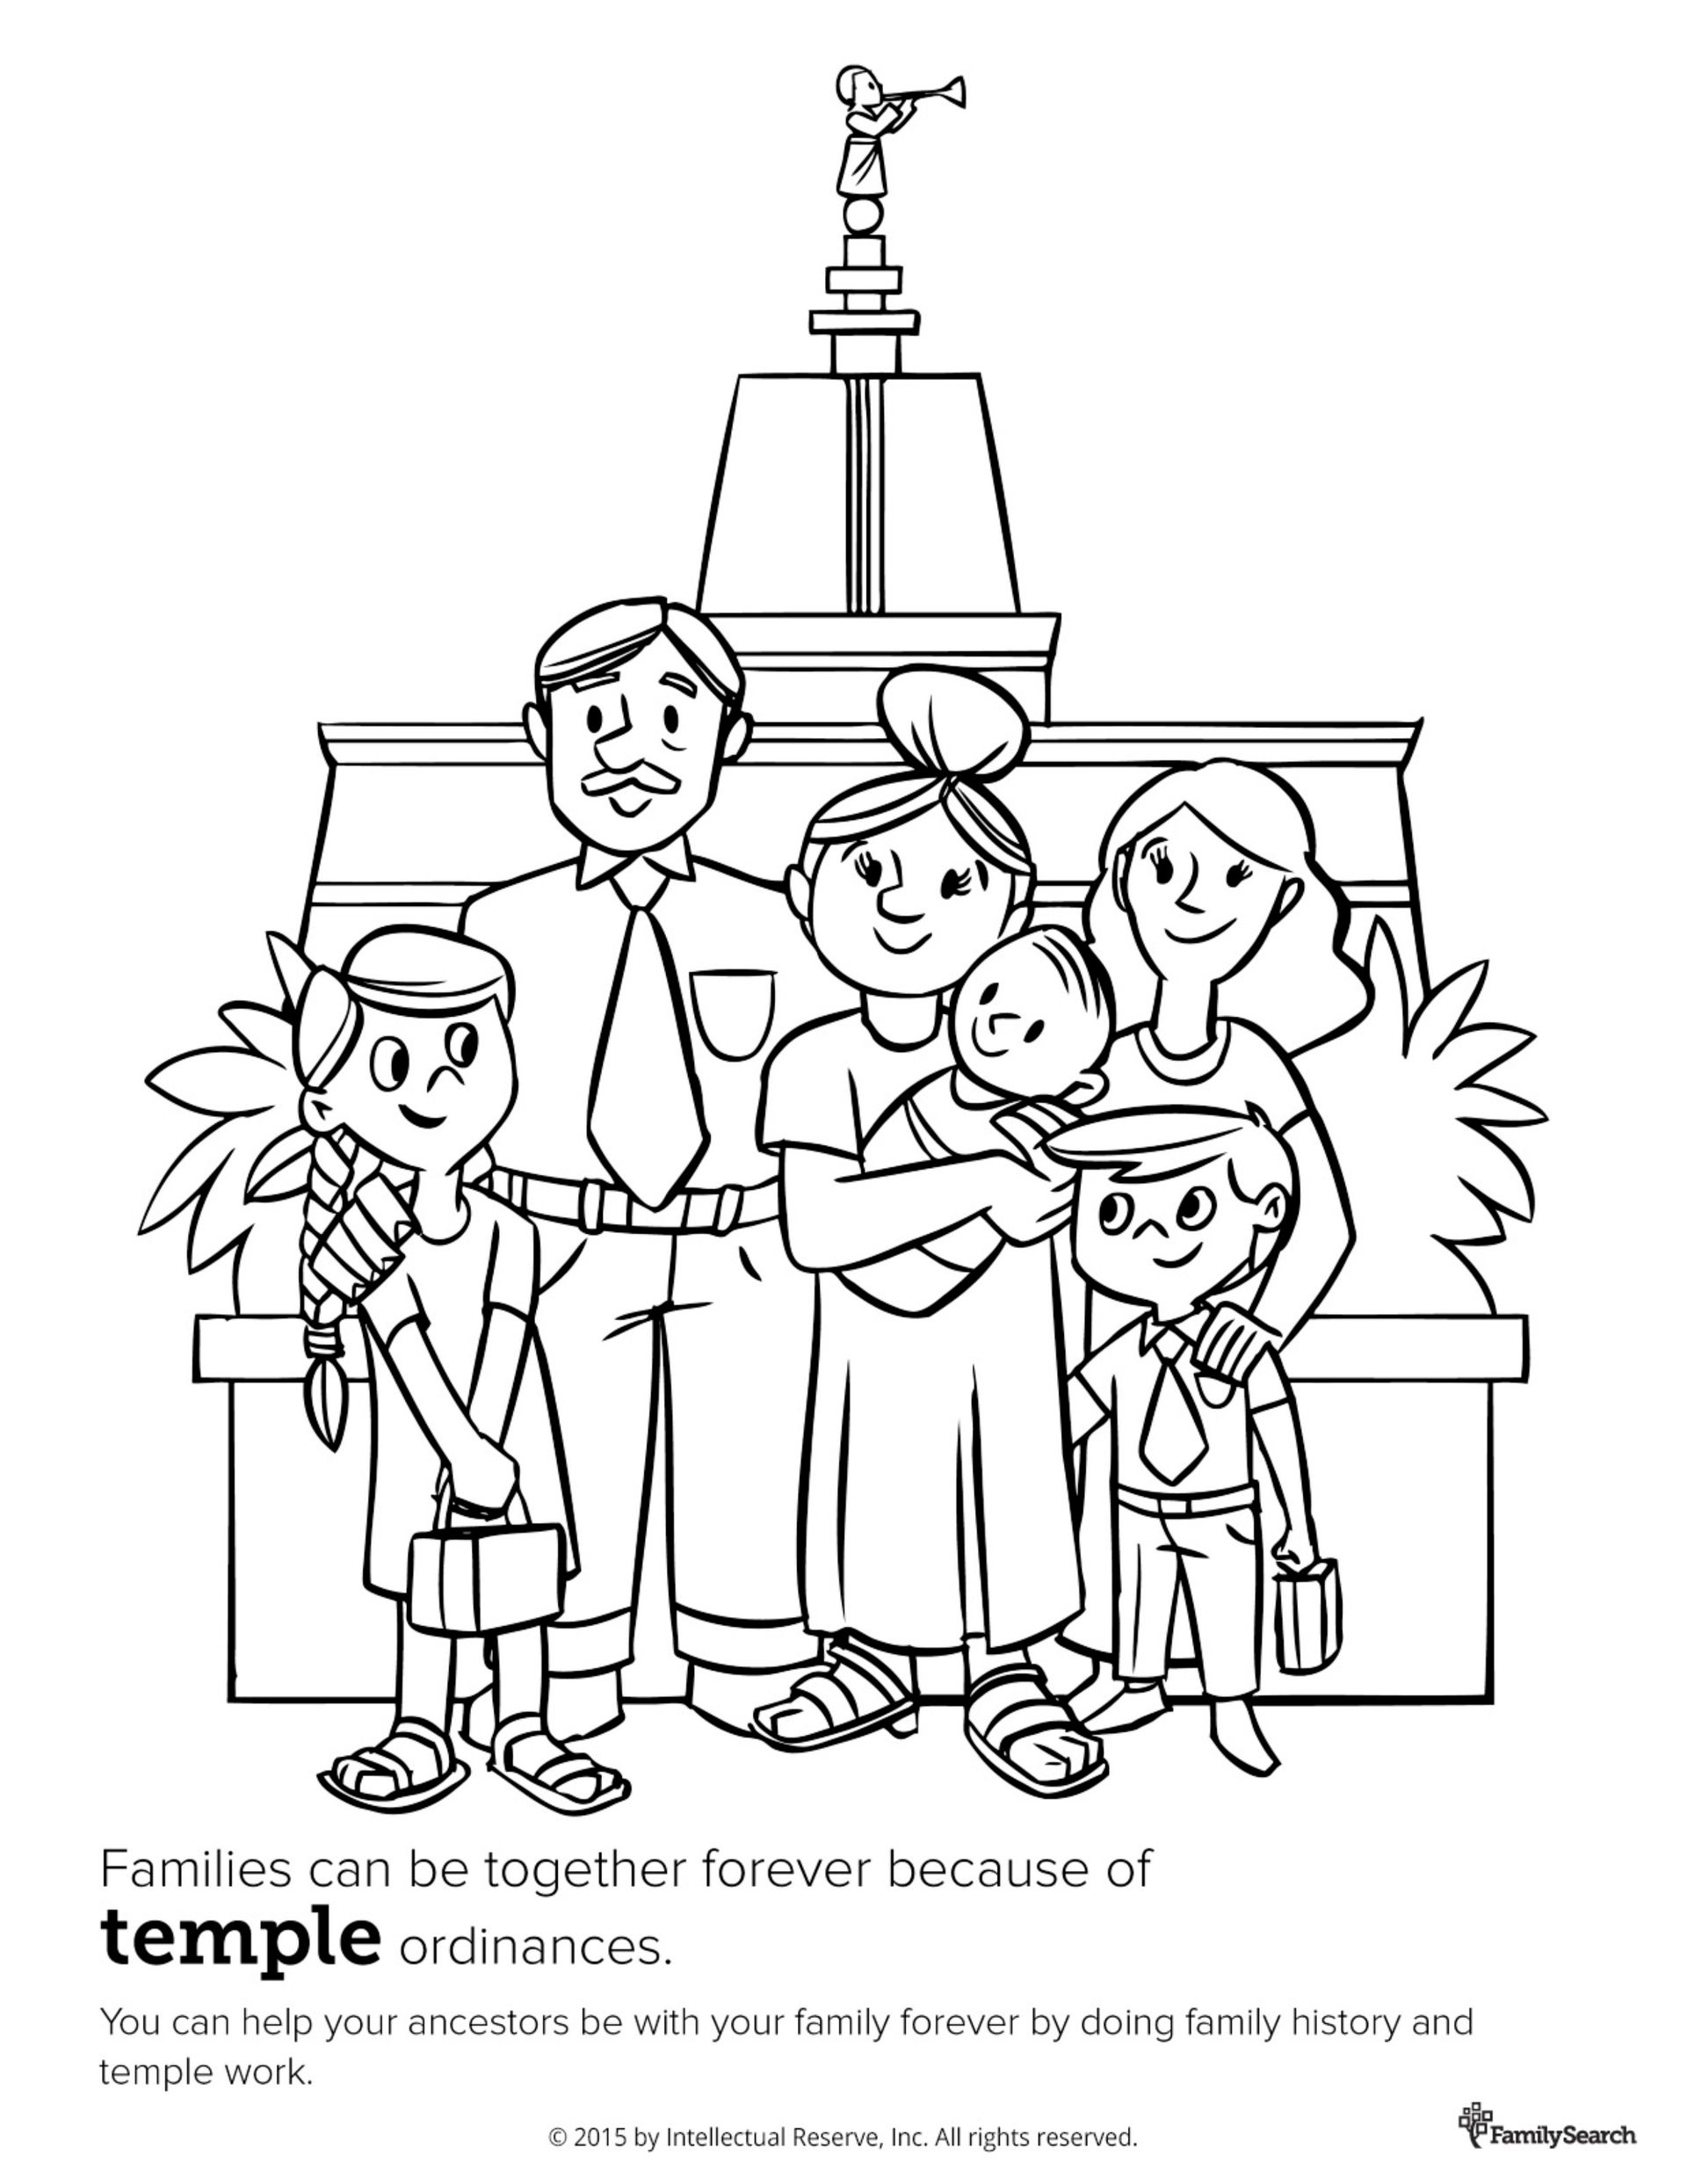 Families can be together forever because of temple ordinances. You can help your ancestors be with your family forever by doing family history and temple work.